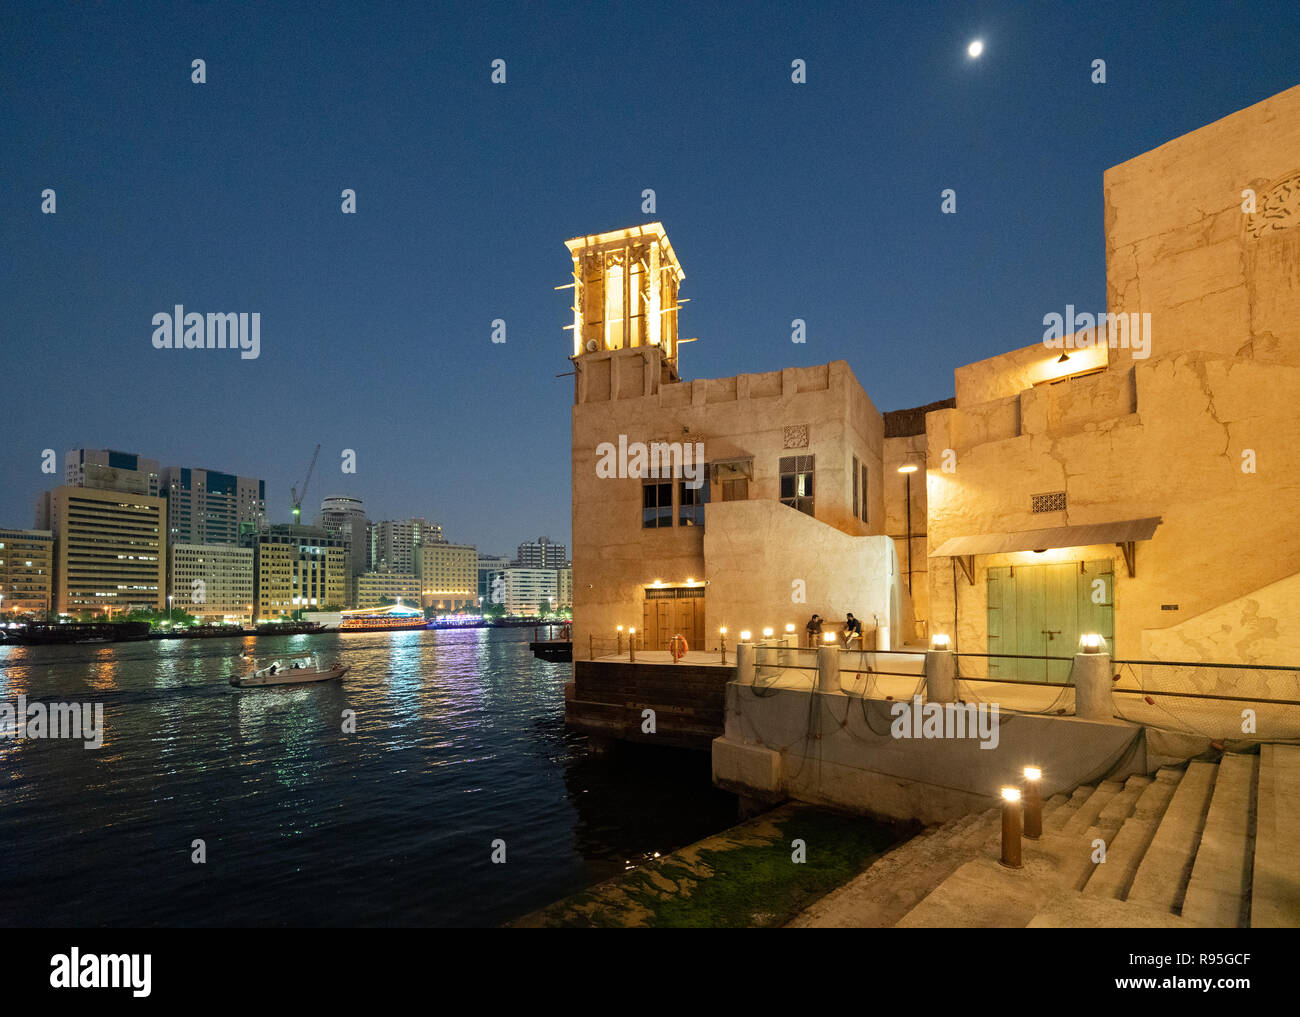 New Al Seef cultural district, built with traditional architecture and design , by The Creek waterside in Dubai, United Arab Emirates Stock Photo